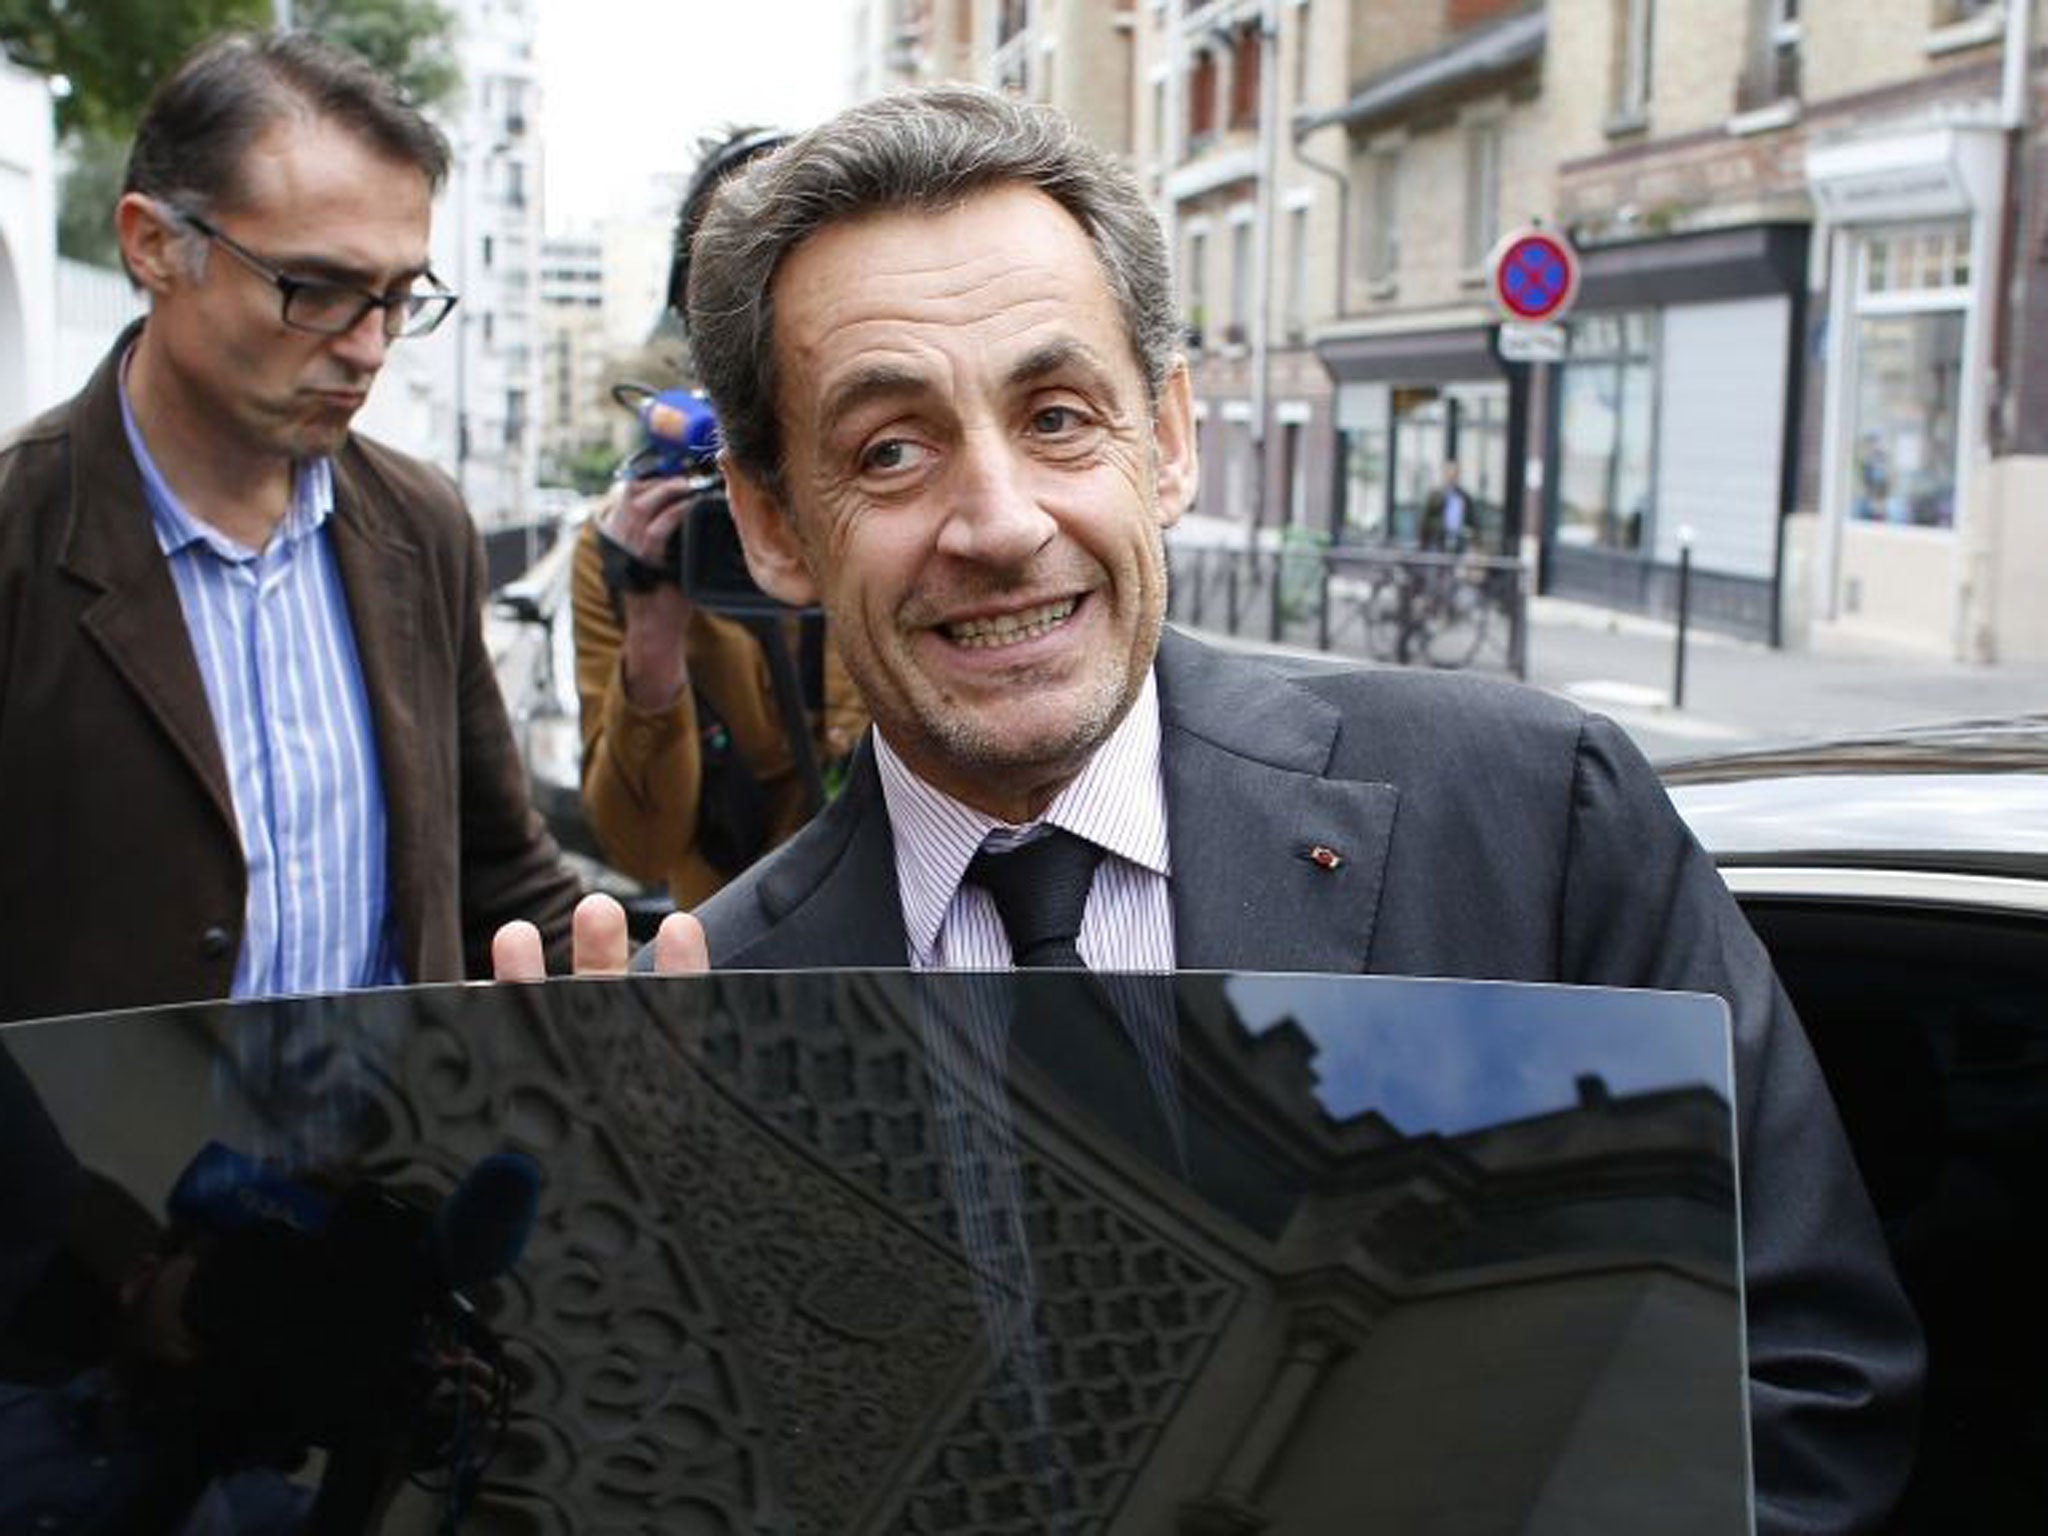 All smiles: With the Bettencourt affair receding, Mr Sarkozy is ready to plan his return